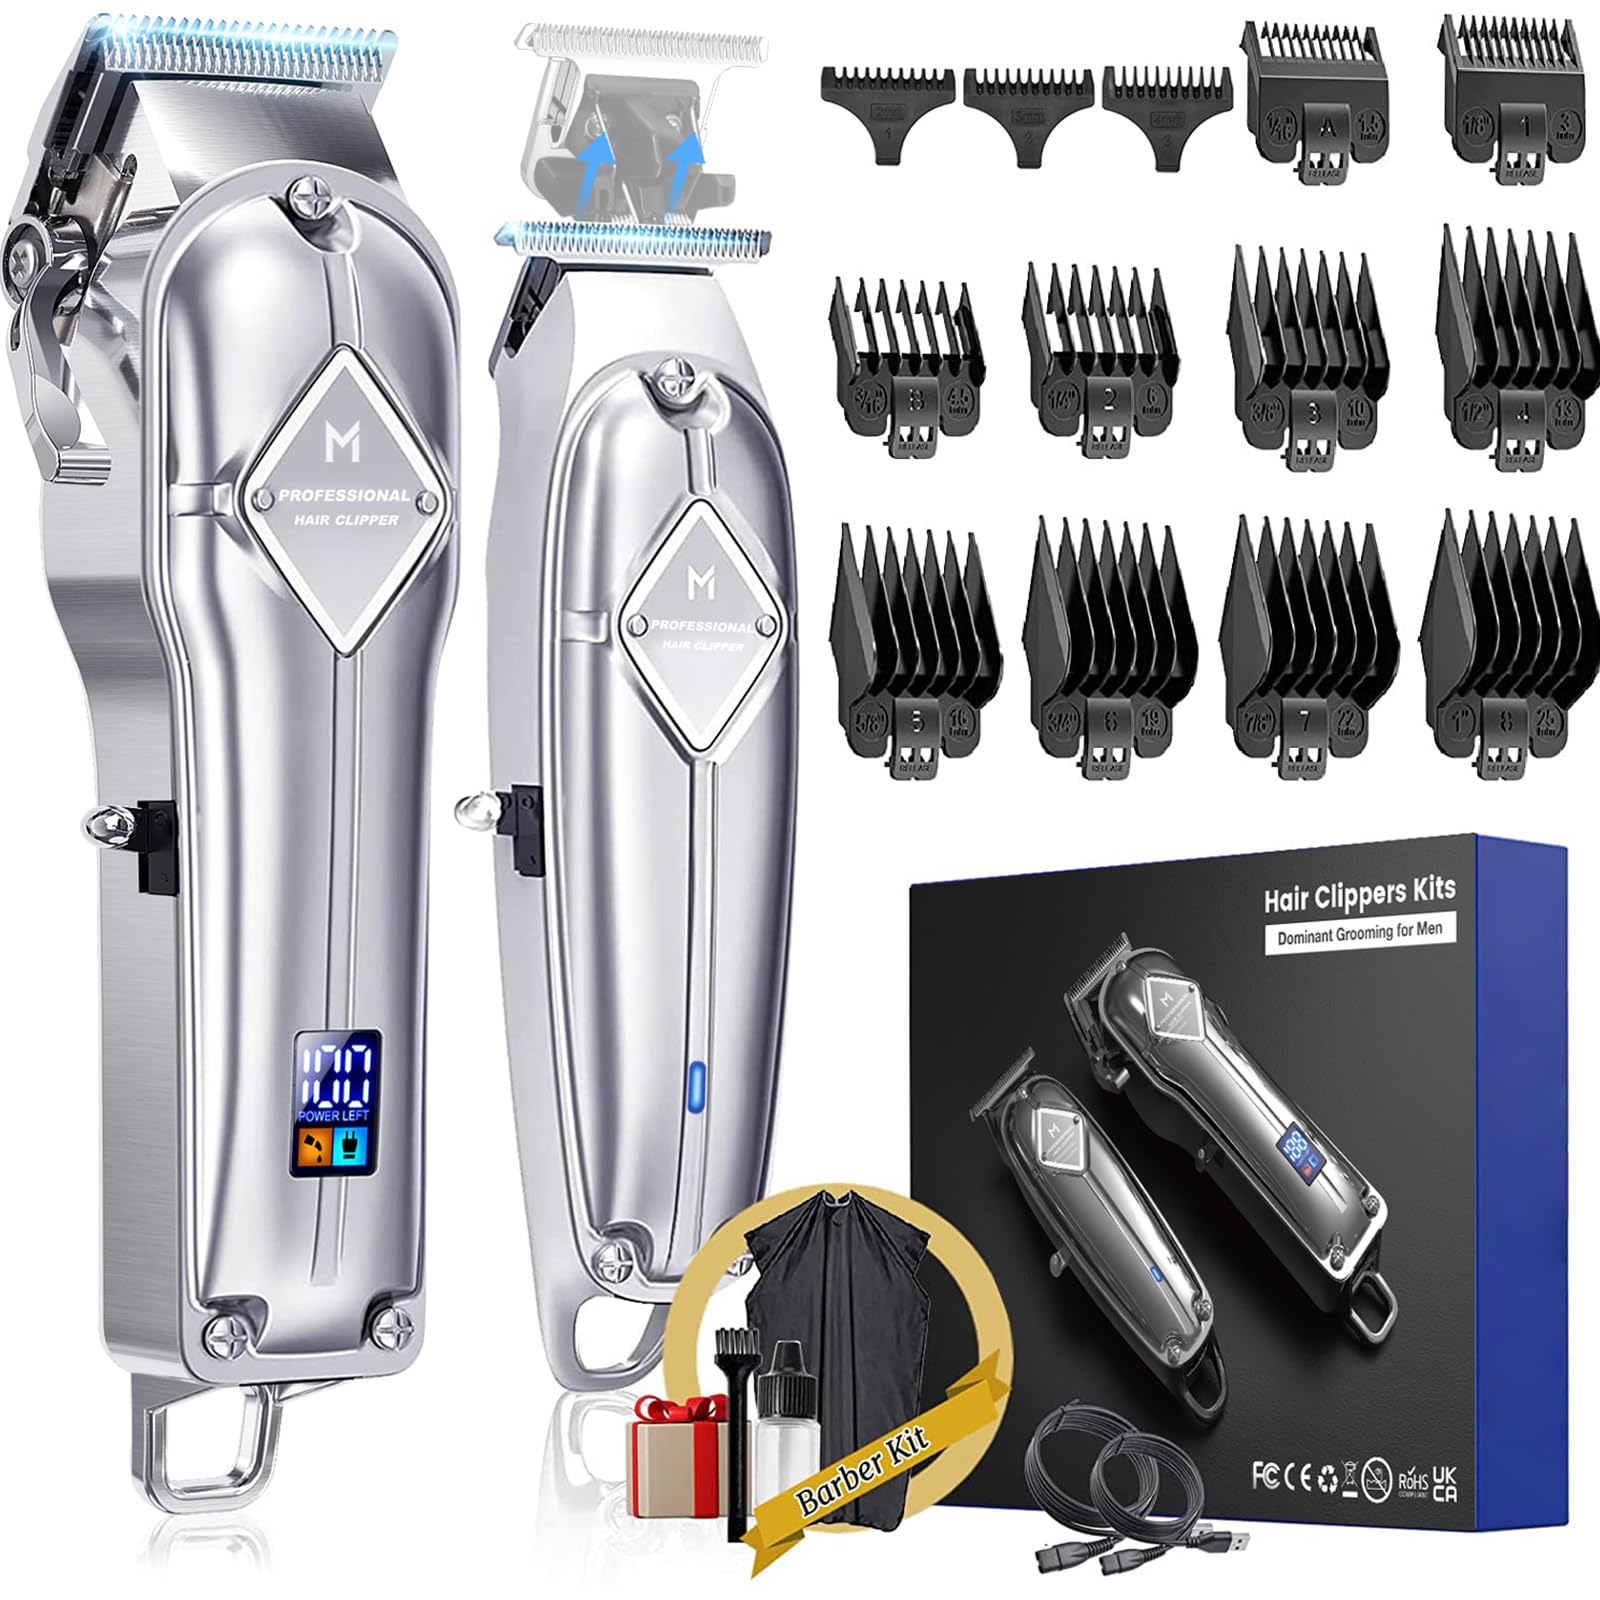 Limural PRO Professional Hair Clippers and Trimmer Kit for Men - Cordless Barber Clipper + T Blade Outliner, Complete Hair Cutting Kits with 13 Premium Guards, LED Display, Taper Lever & 5 Hrs Runtime Polished Silver